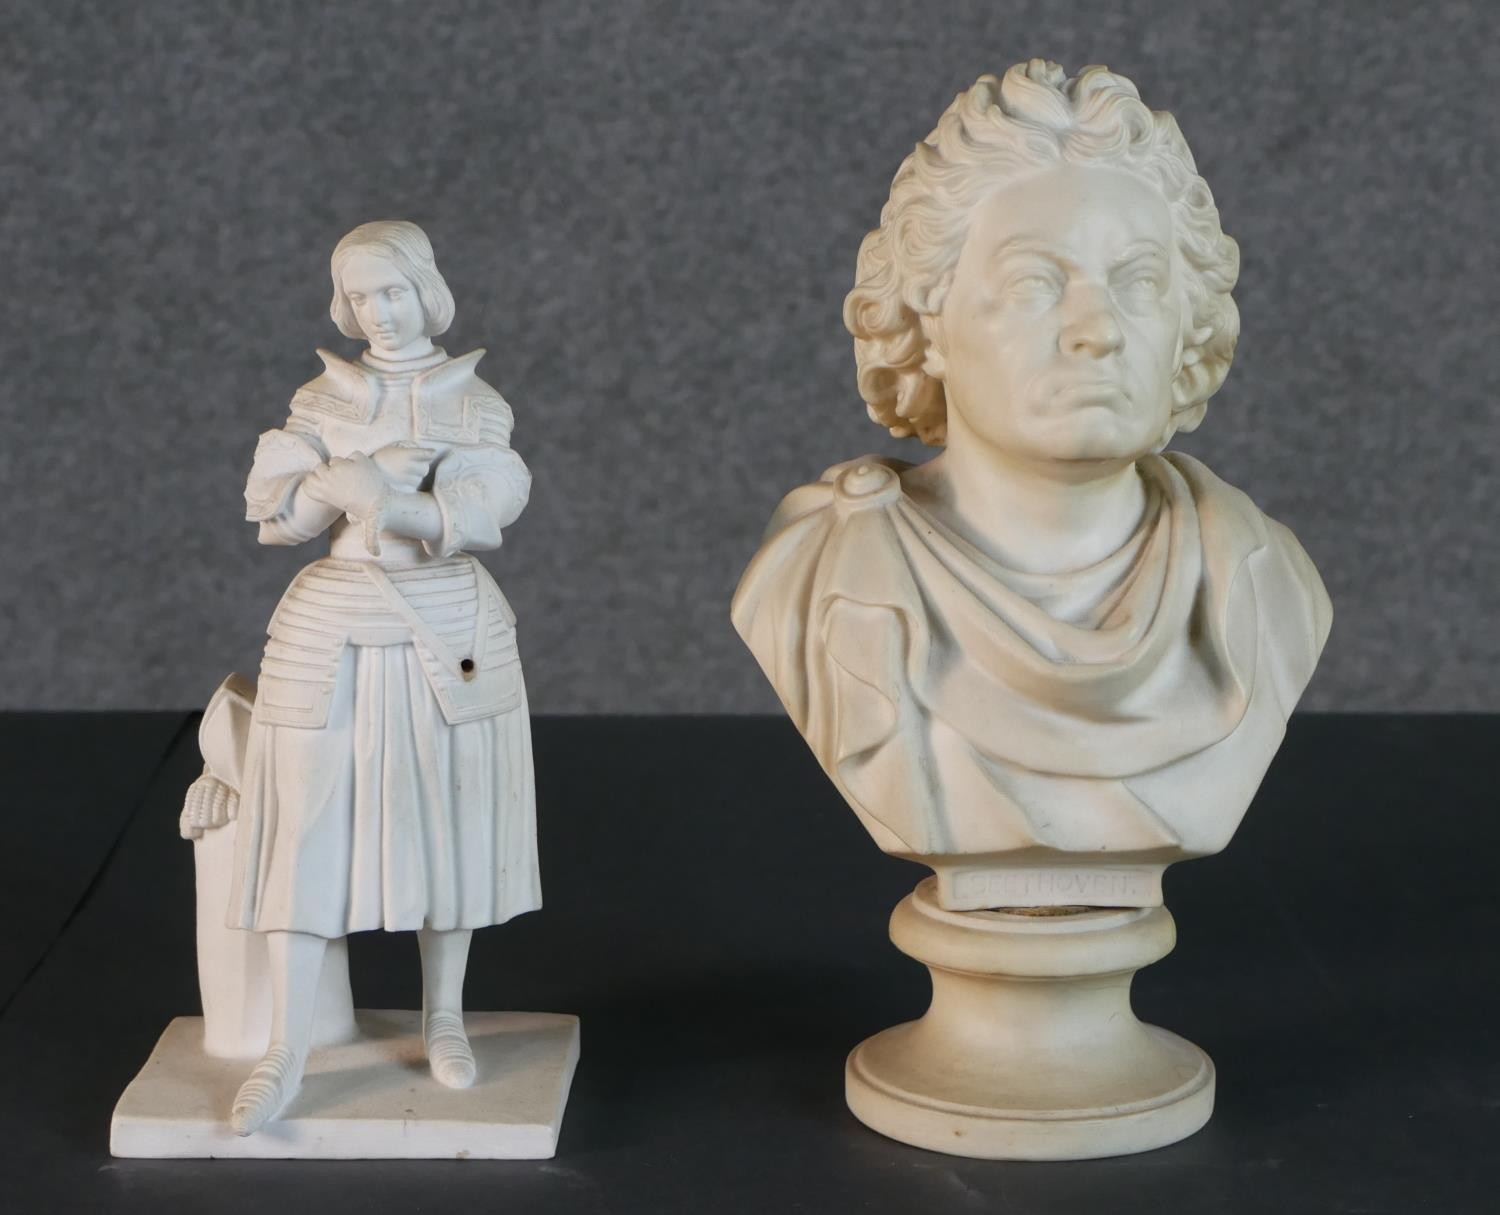 A Copeland parian bust of Ludwig Van Beethoven, after an original by A. Hays, on socle base, the